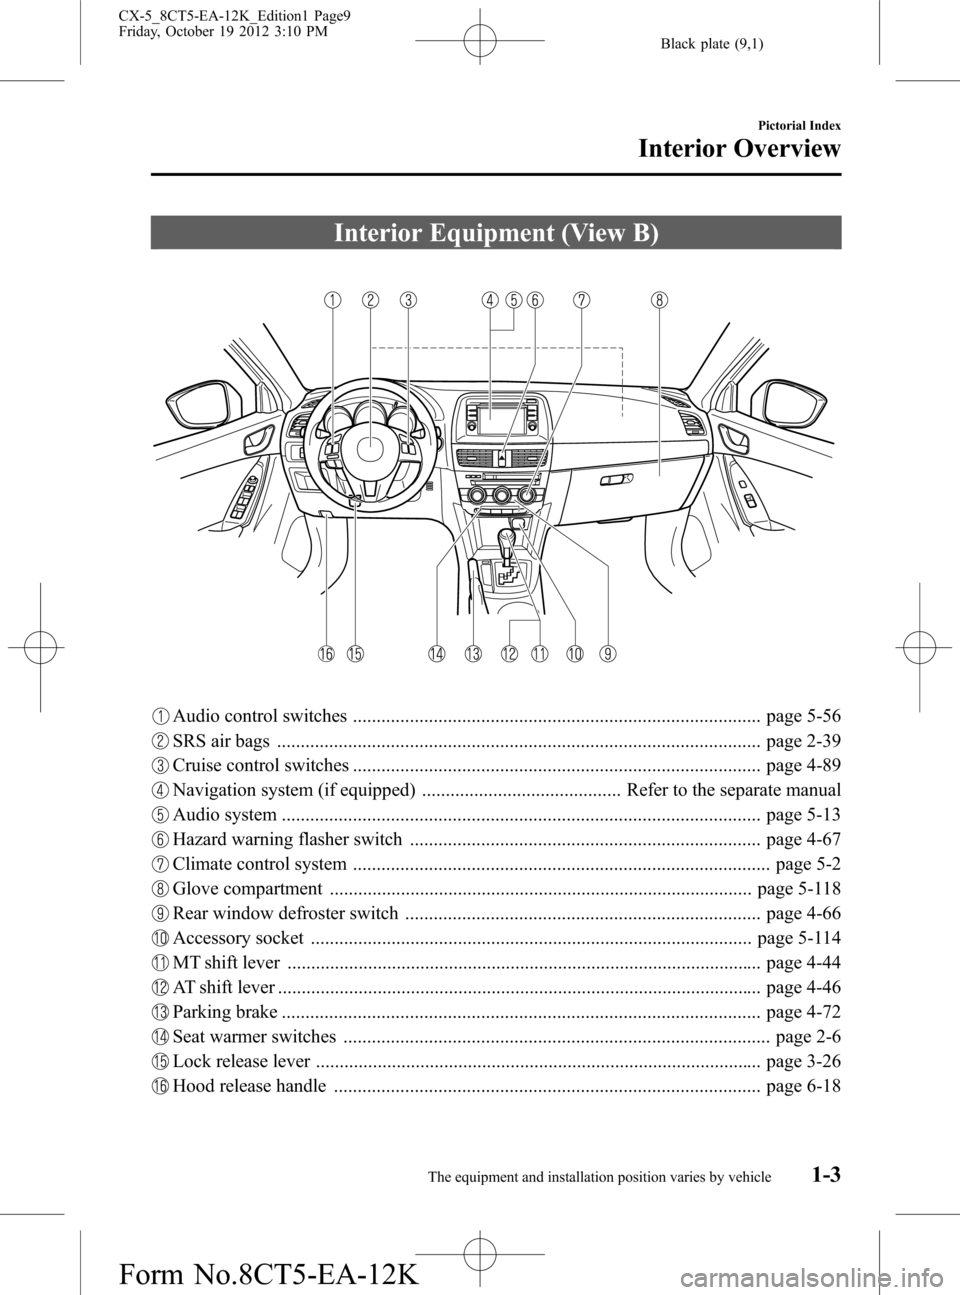 MAZDA MODEL CX-5 2014  Owners Manual (in English) Black plate (9,1)
Interior Equipment (View B)
Audio control switches ...................................................................................... page 5-56
SRS air bags .....................